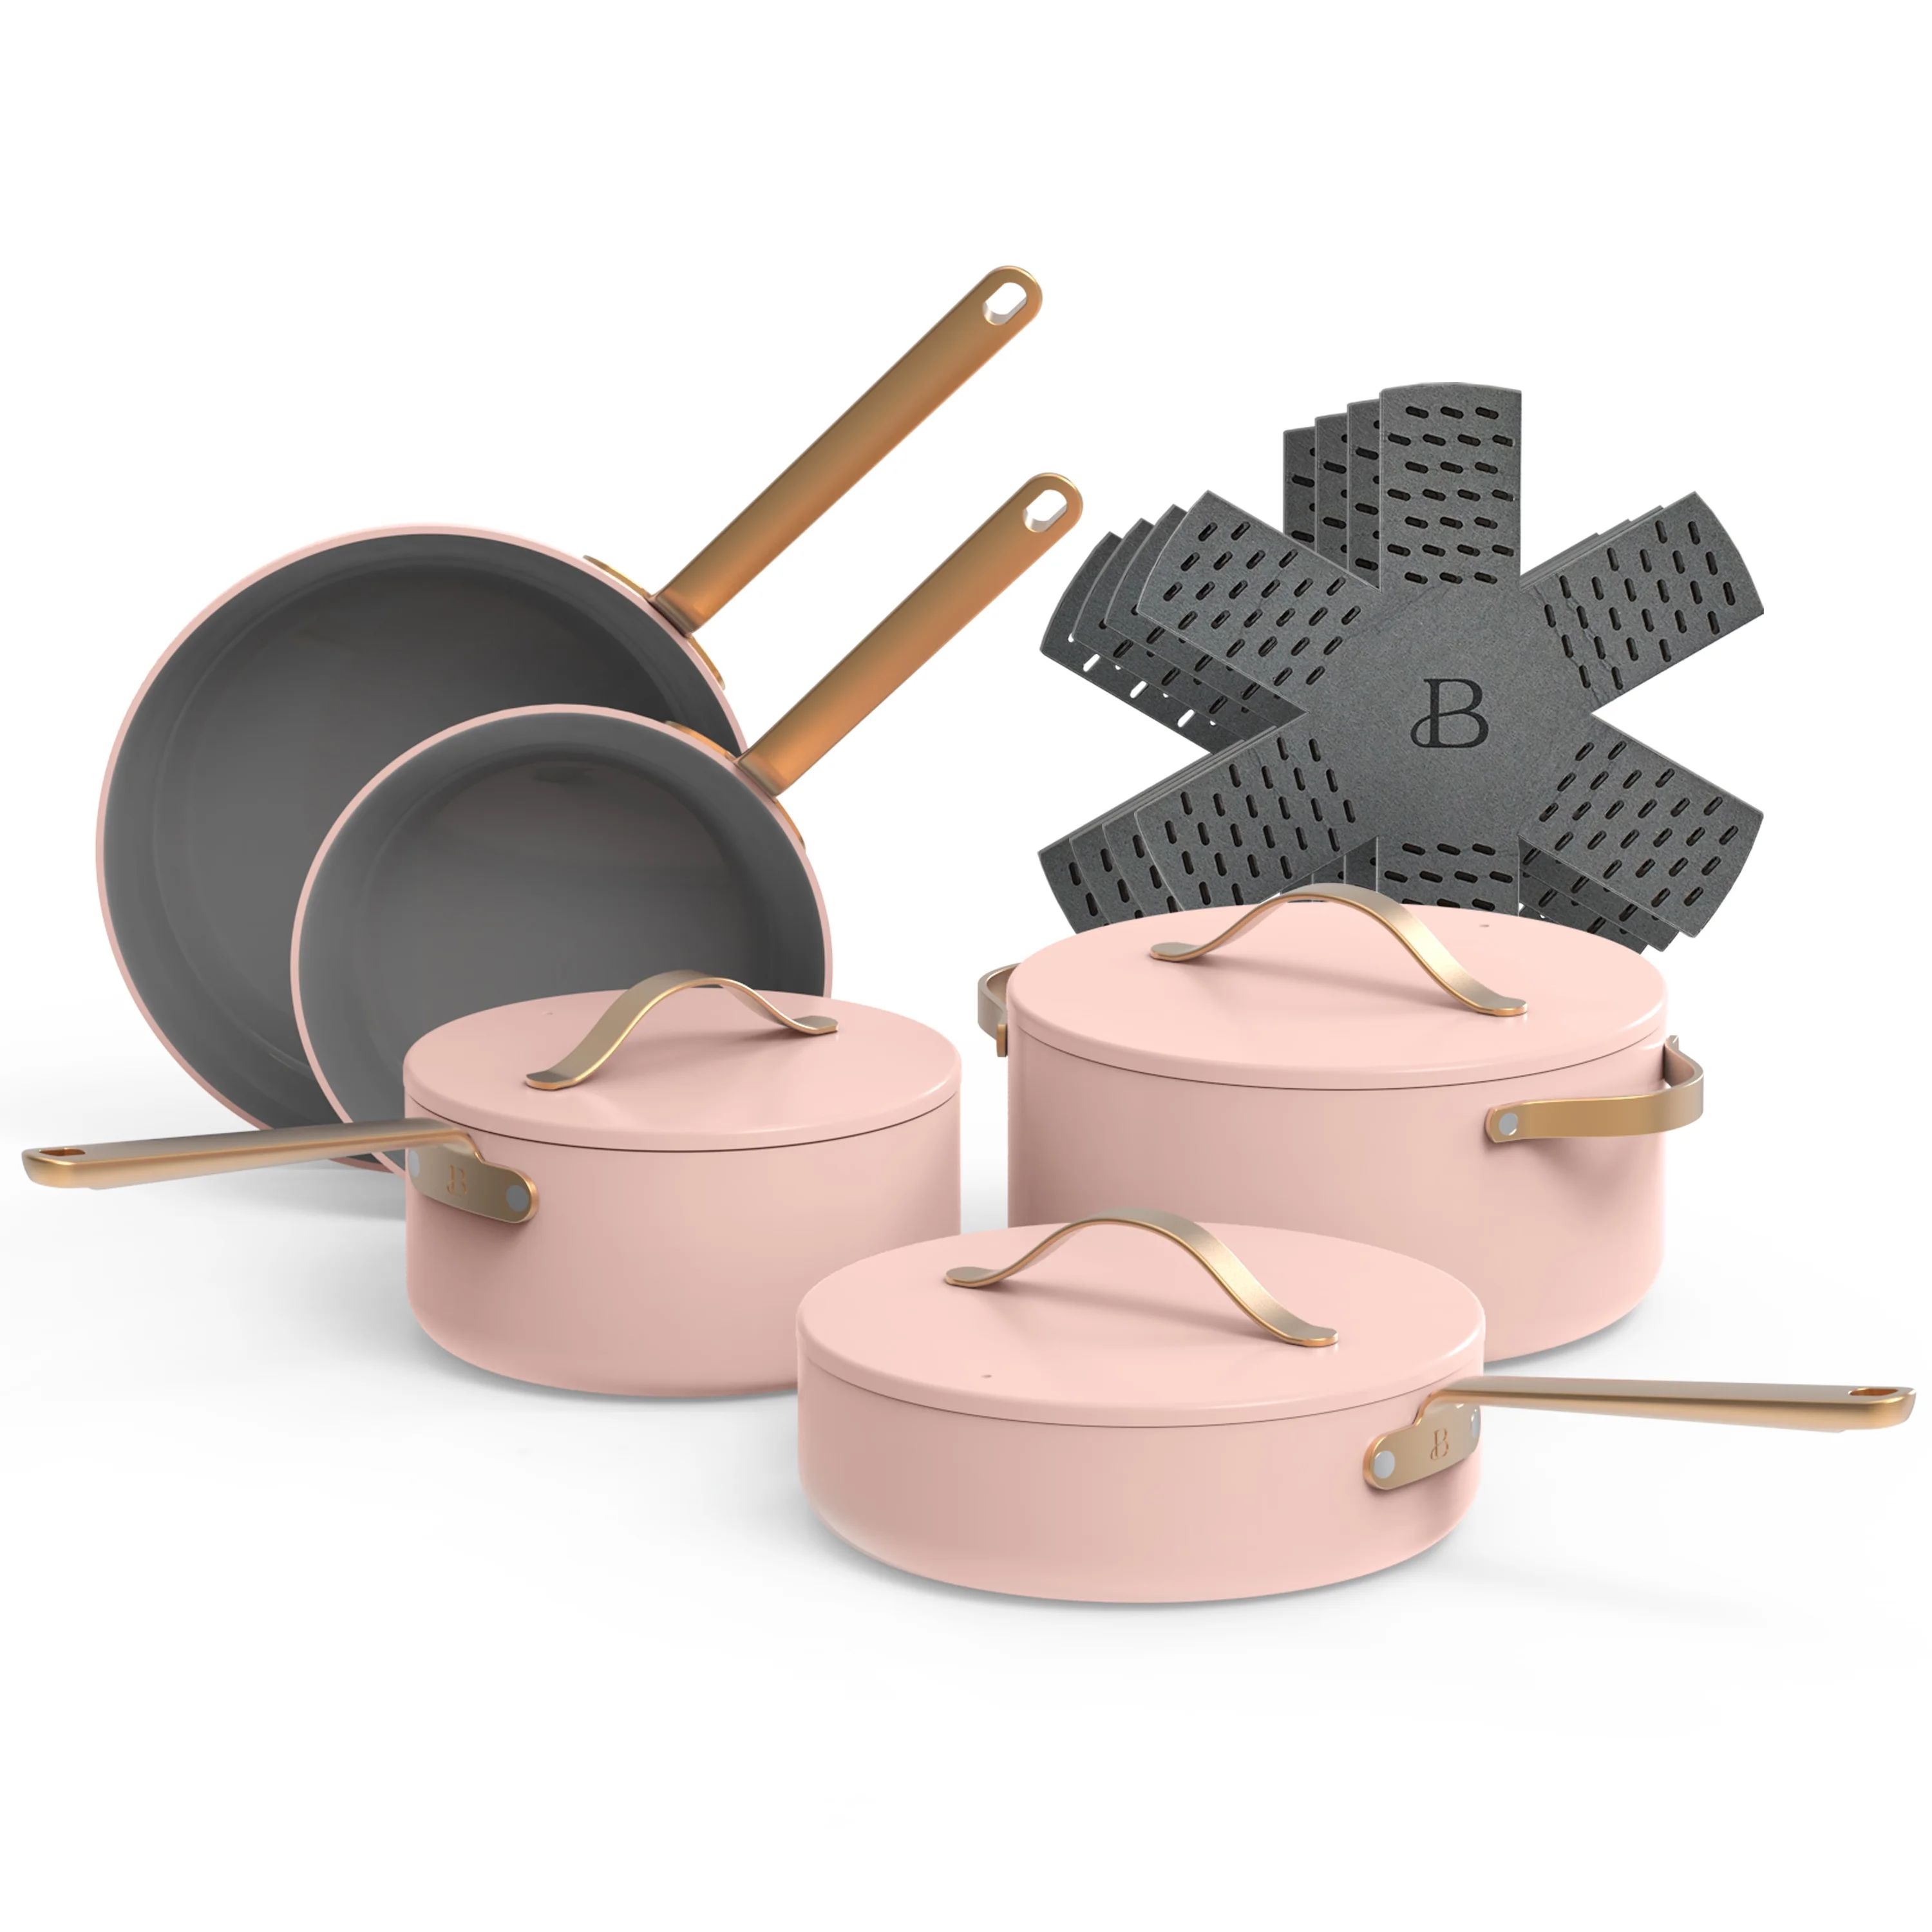 Beautiful 12pc Ceramic Non-Stick Cookware Set, Rose by Drew Barrymore | Walmart (US)